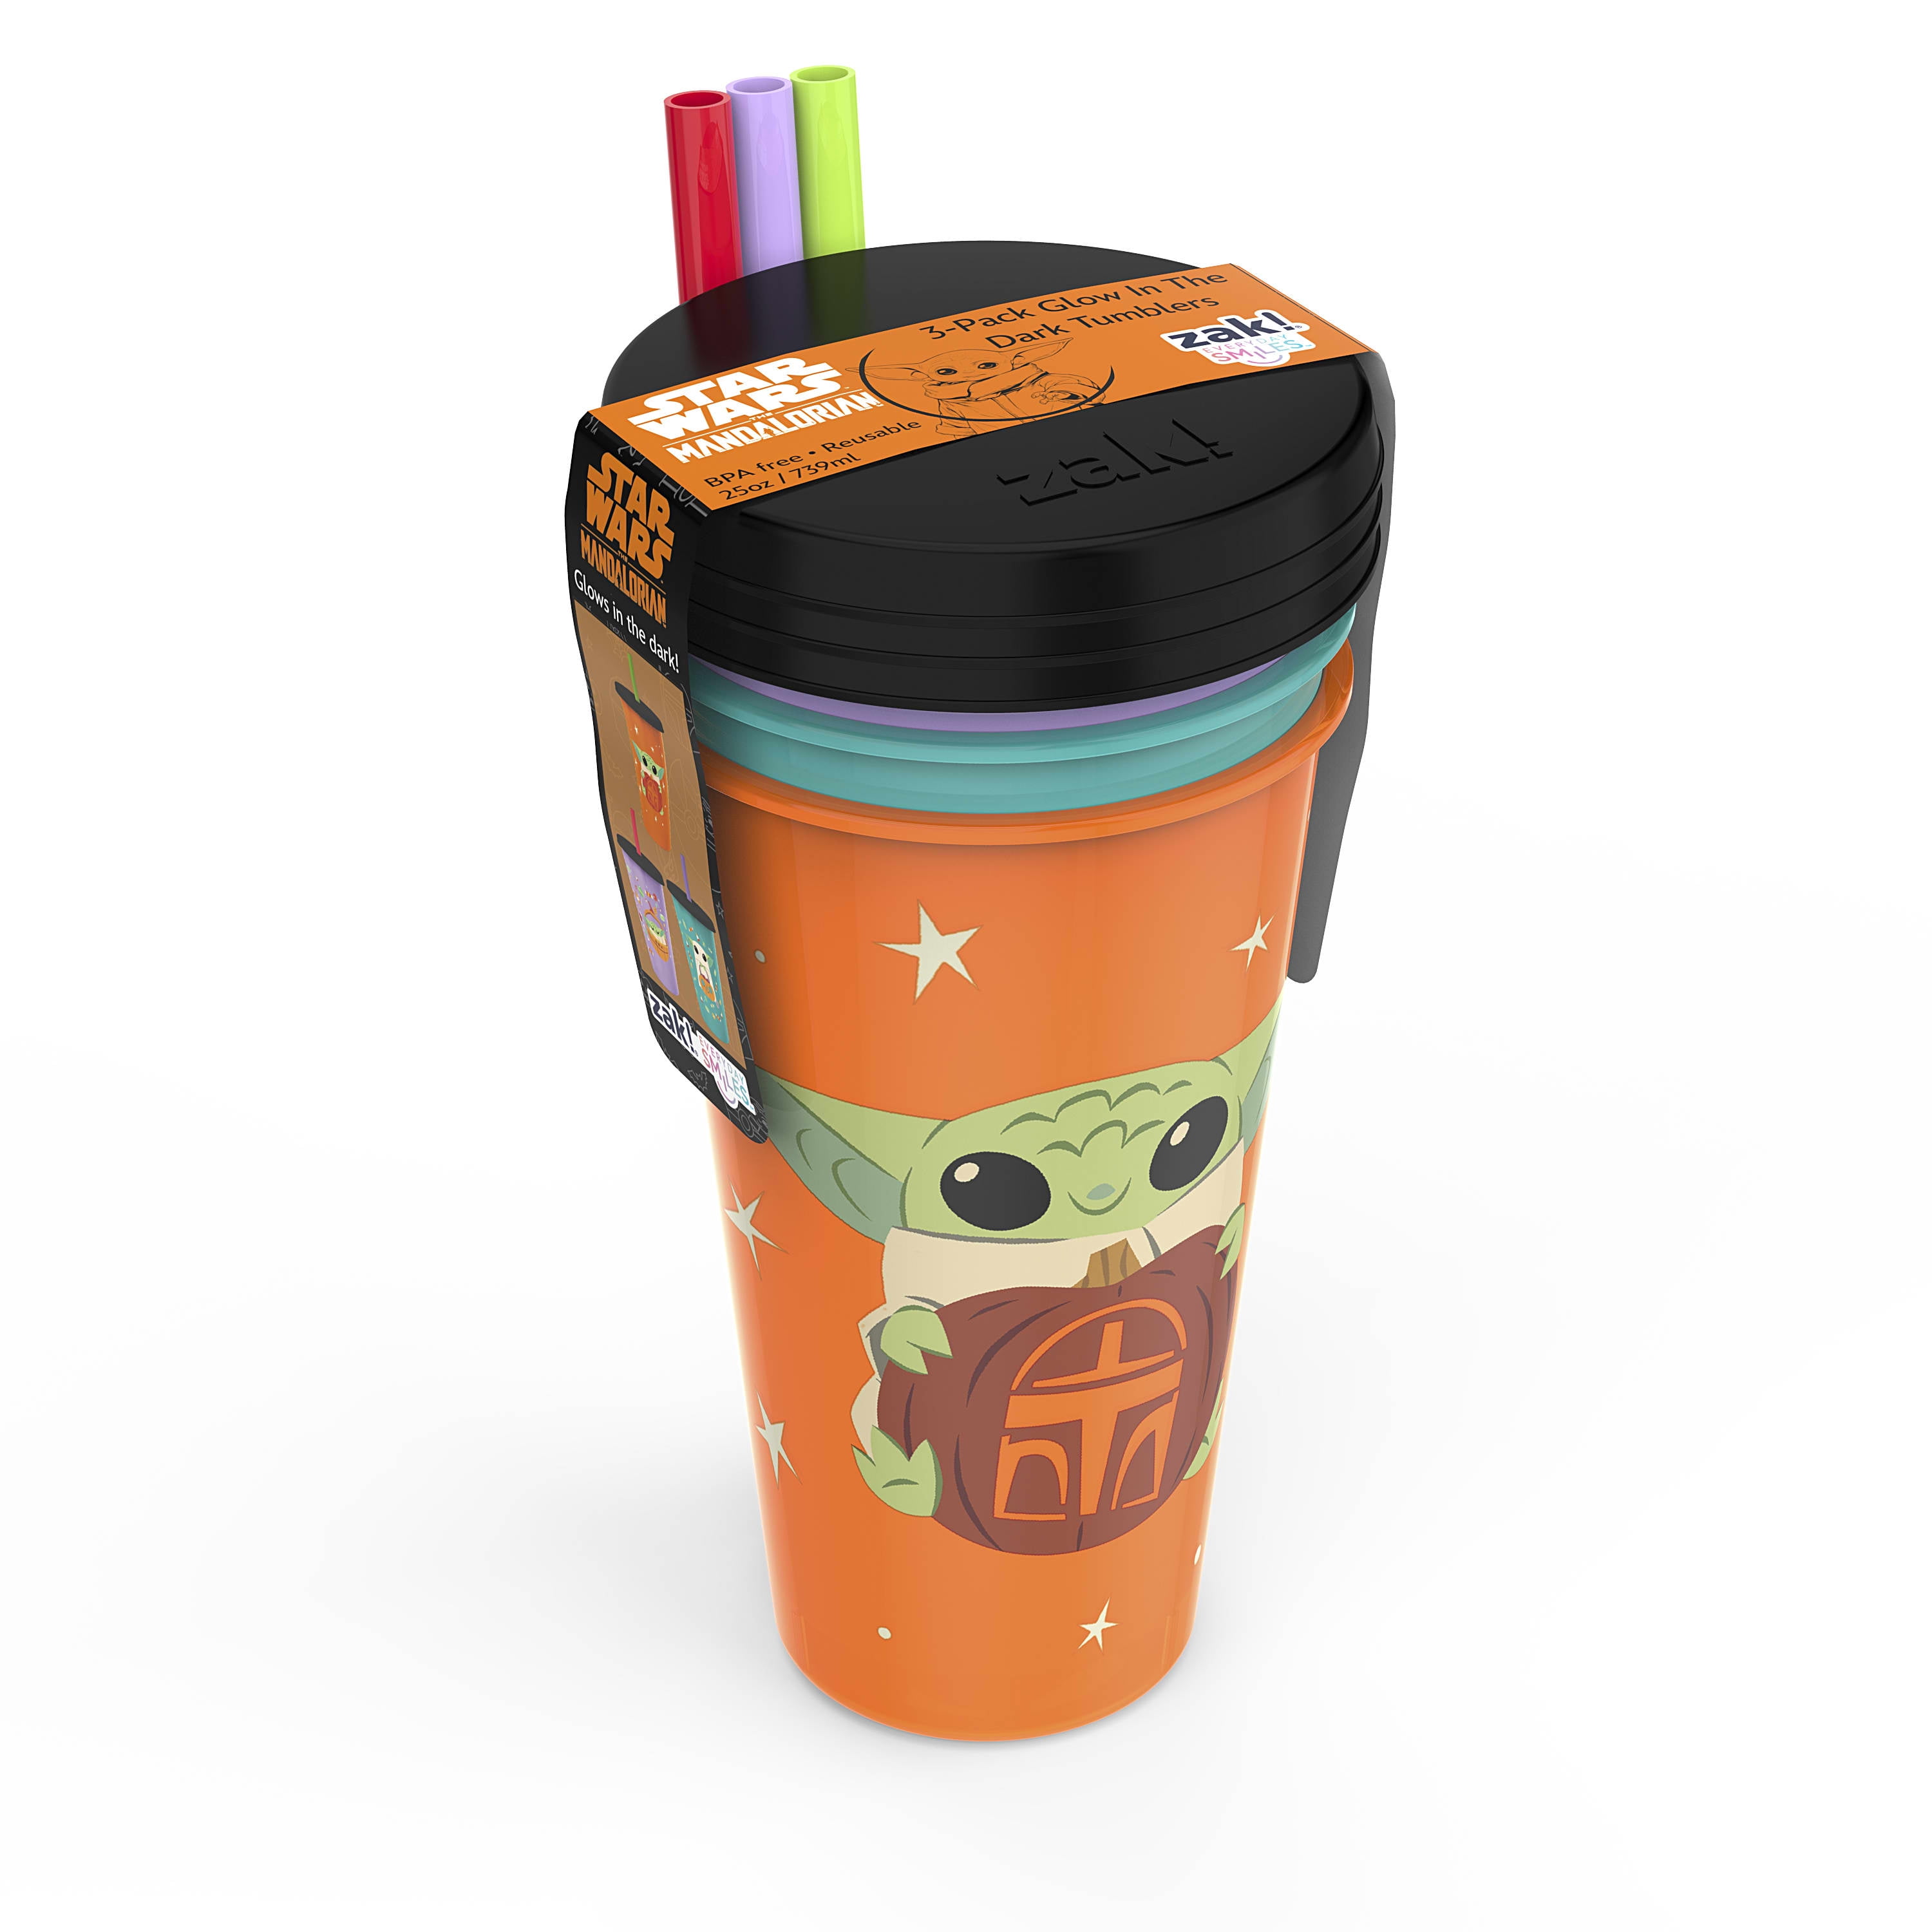 Star Wars The Mandalorian The Child Plastic 32oz. Cup, 1ct